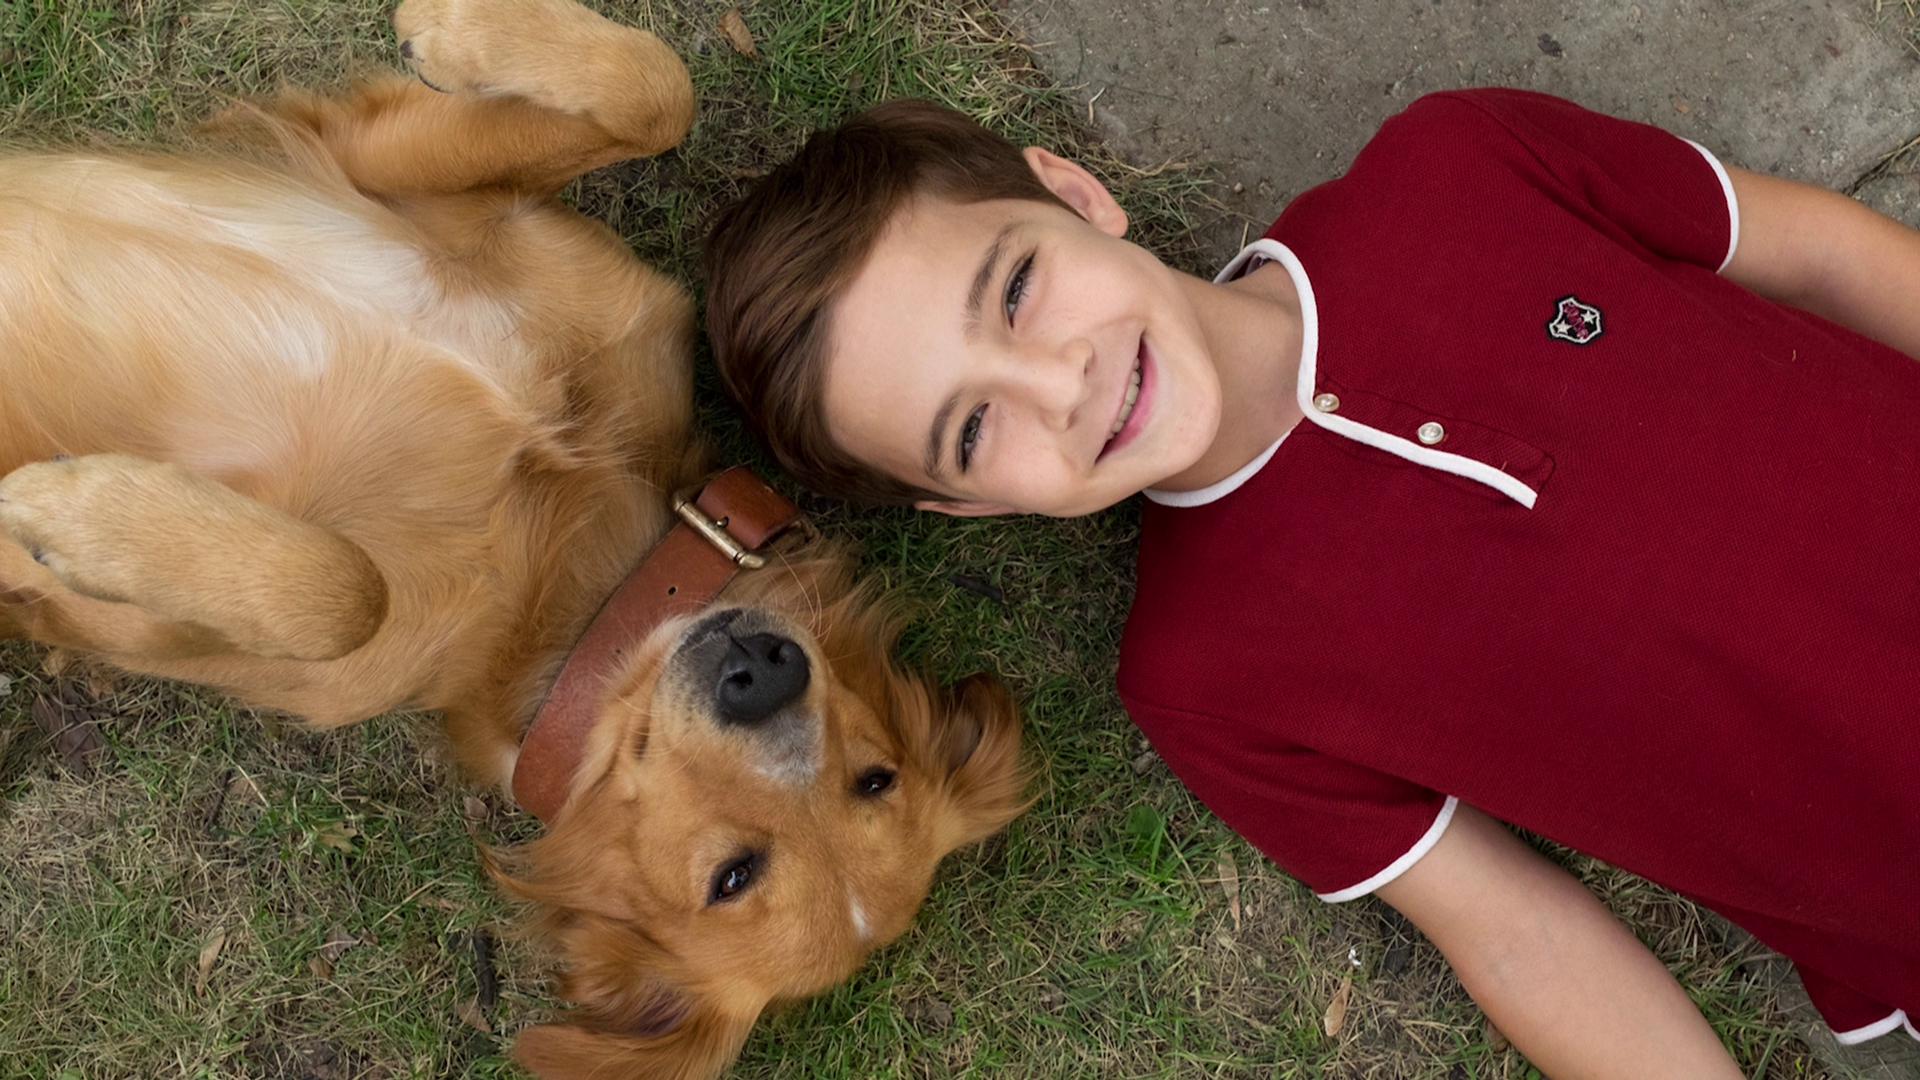 A Dog's Purpose Wallpaper Free A Dog's Purpose Background